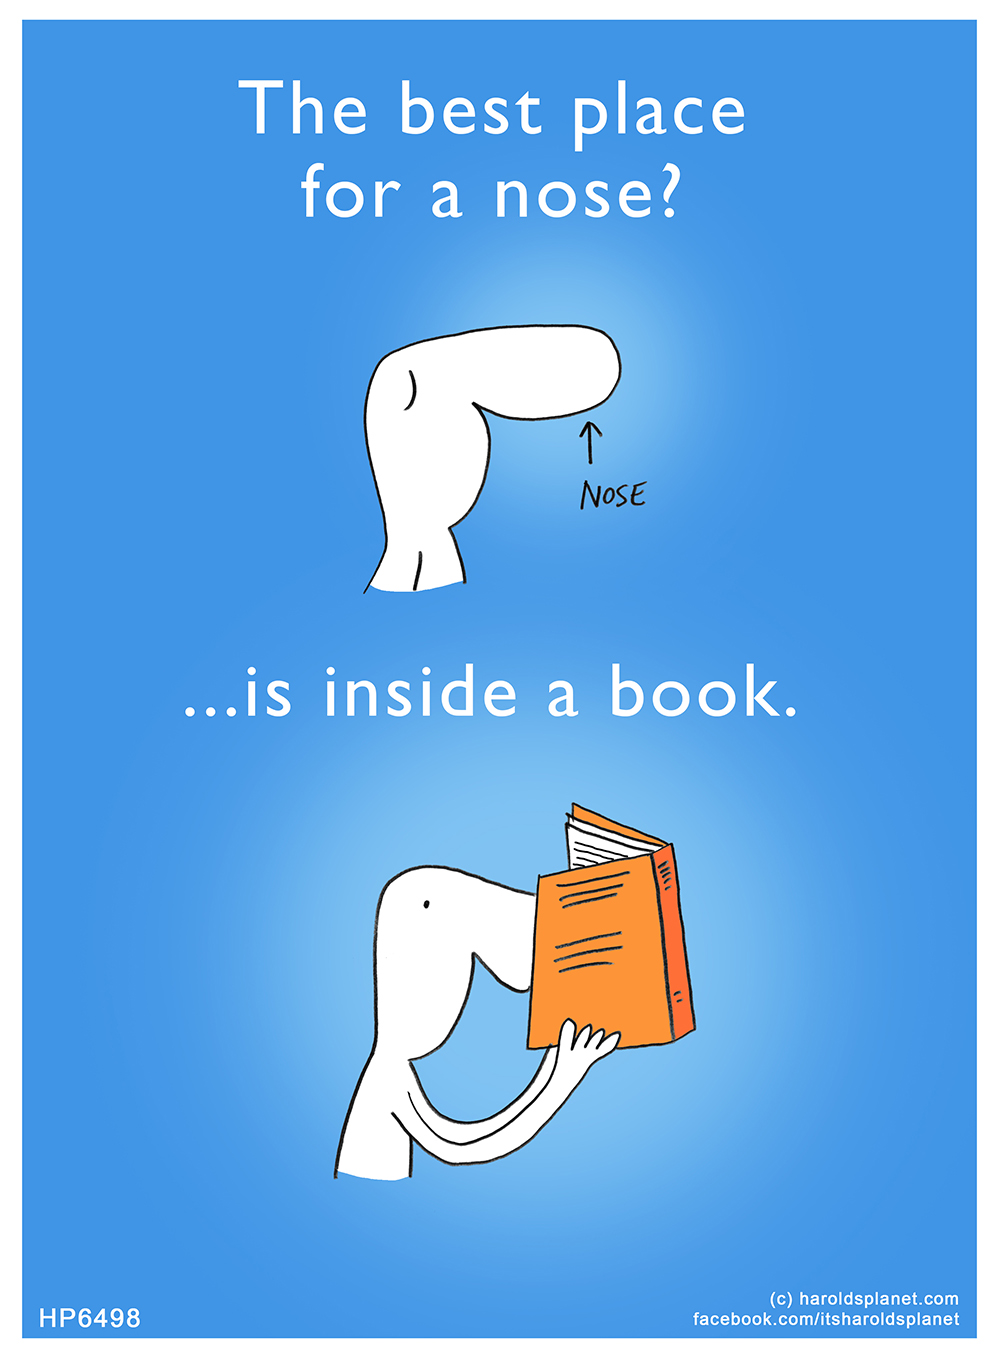 Harold's Planet: The best place for a nose? Inside a book.
